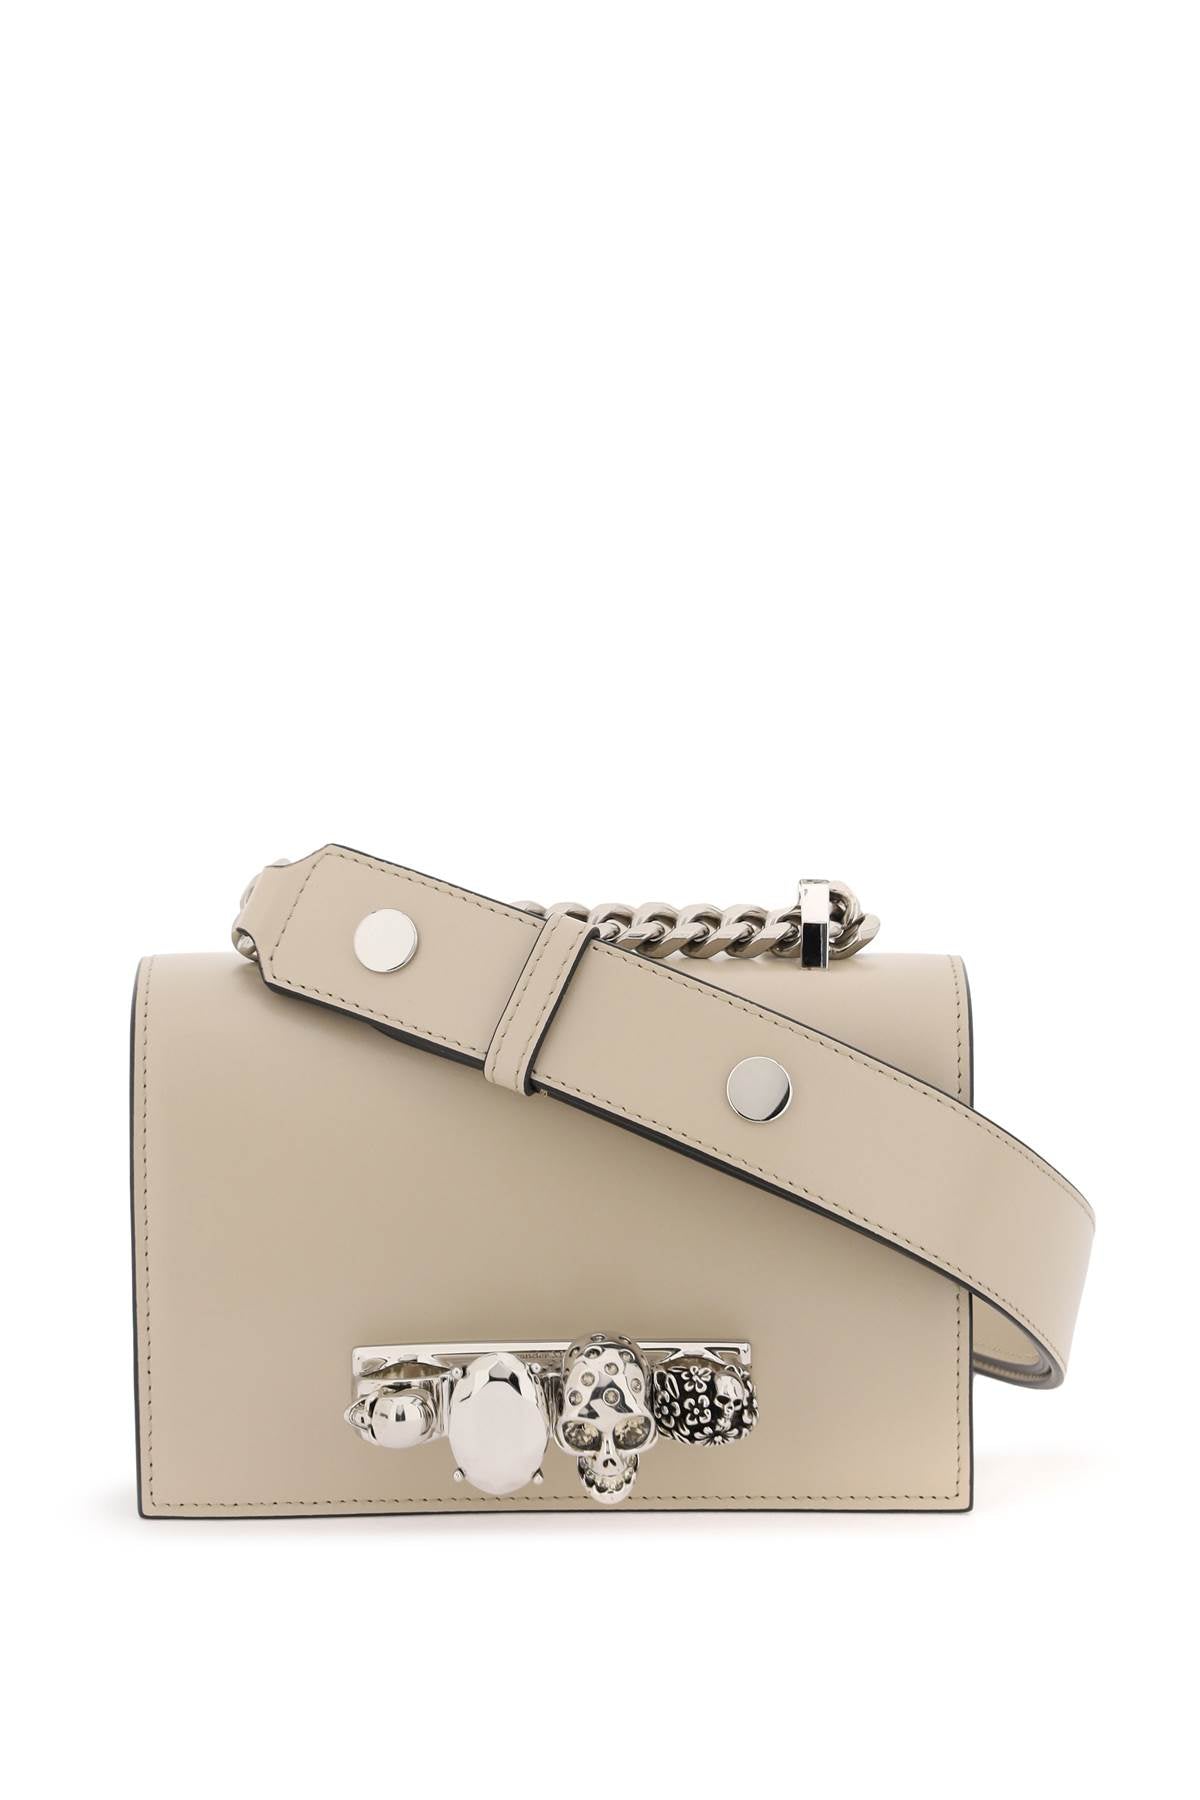 ALEXANDER MCQUEEN Mini Jeweled Satchel with Skull and Swarovski Crystals - Tan Leather Shoulder Bag